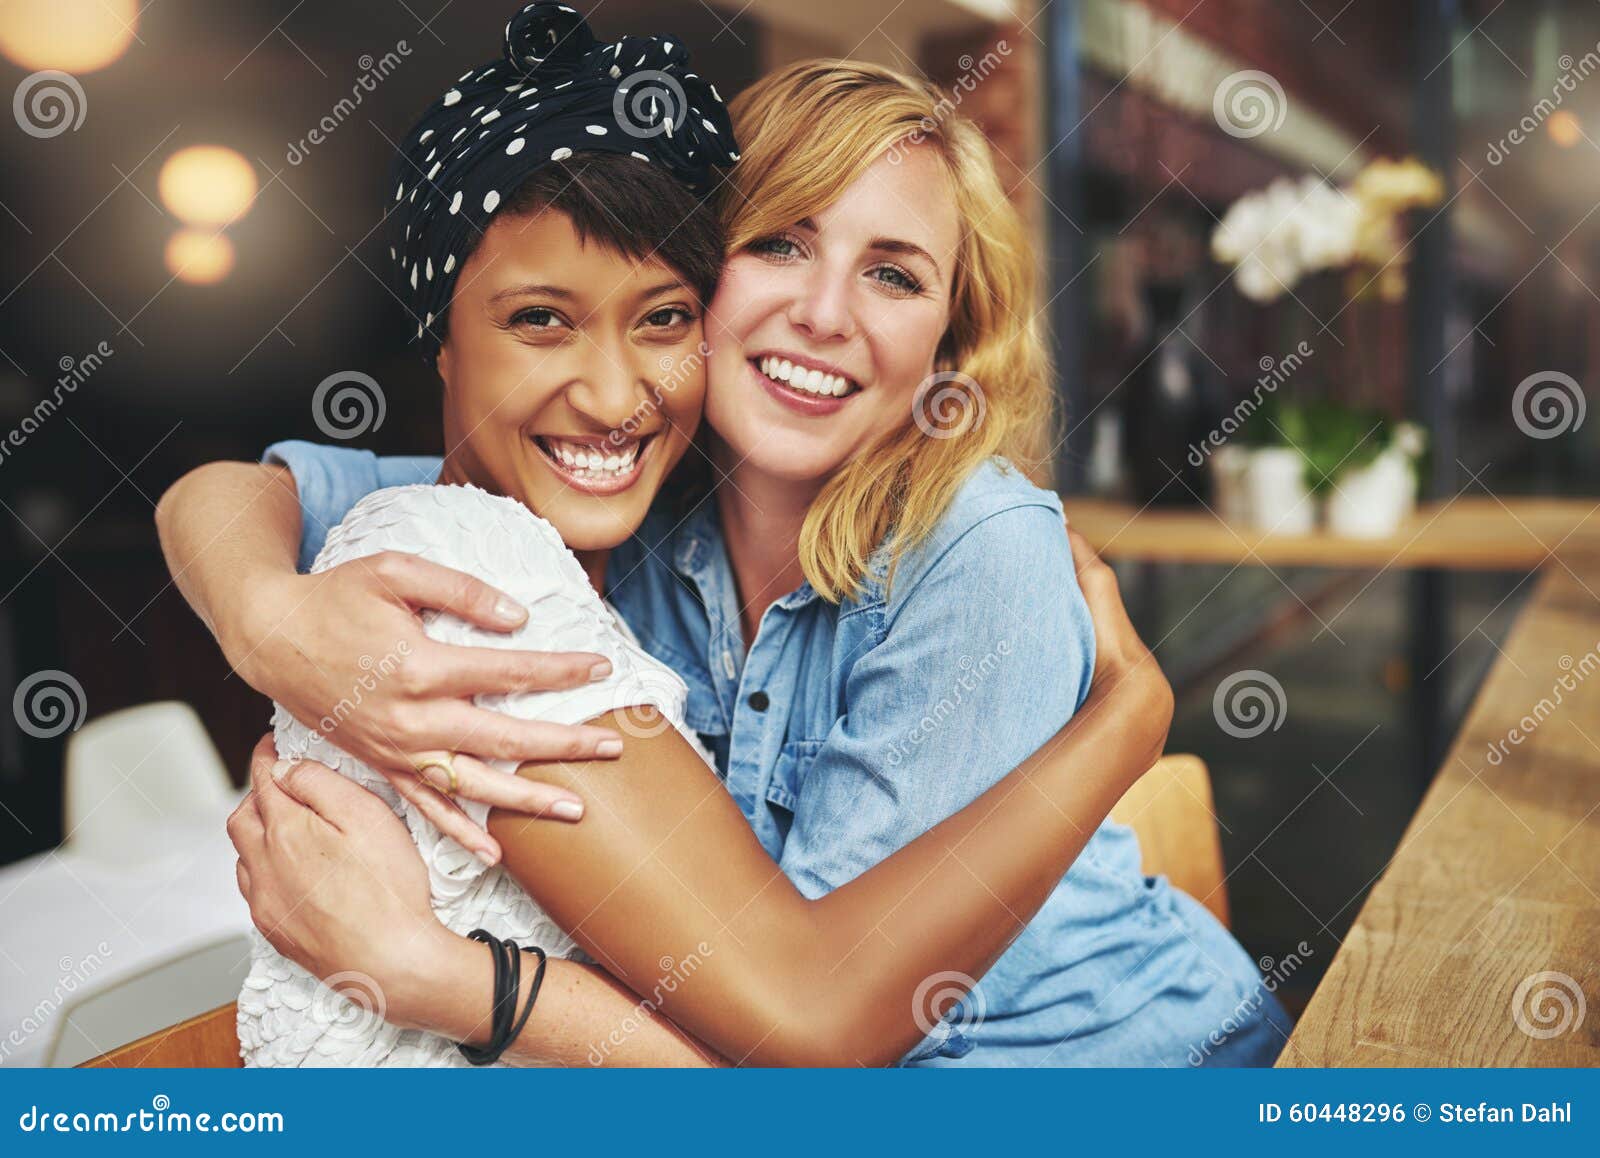 two happy affectionate young woman hugging